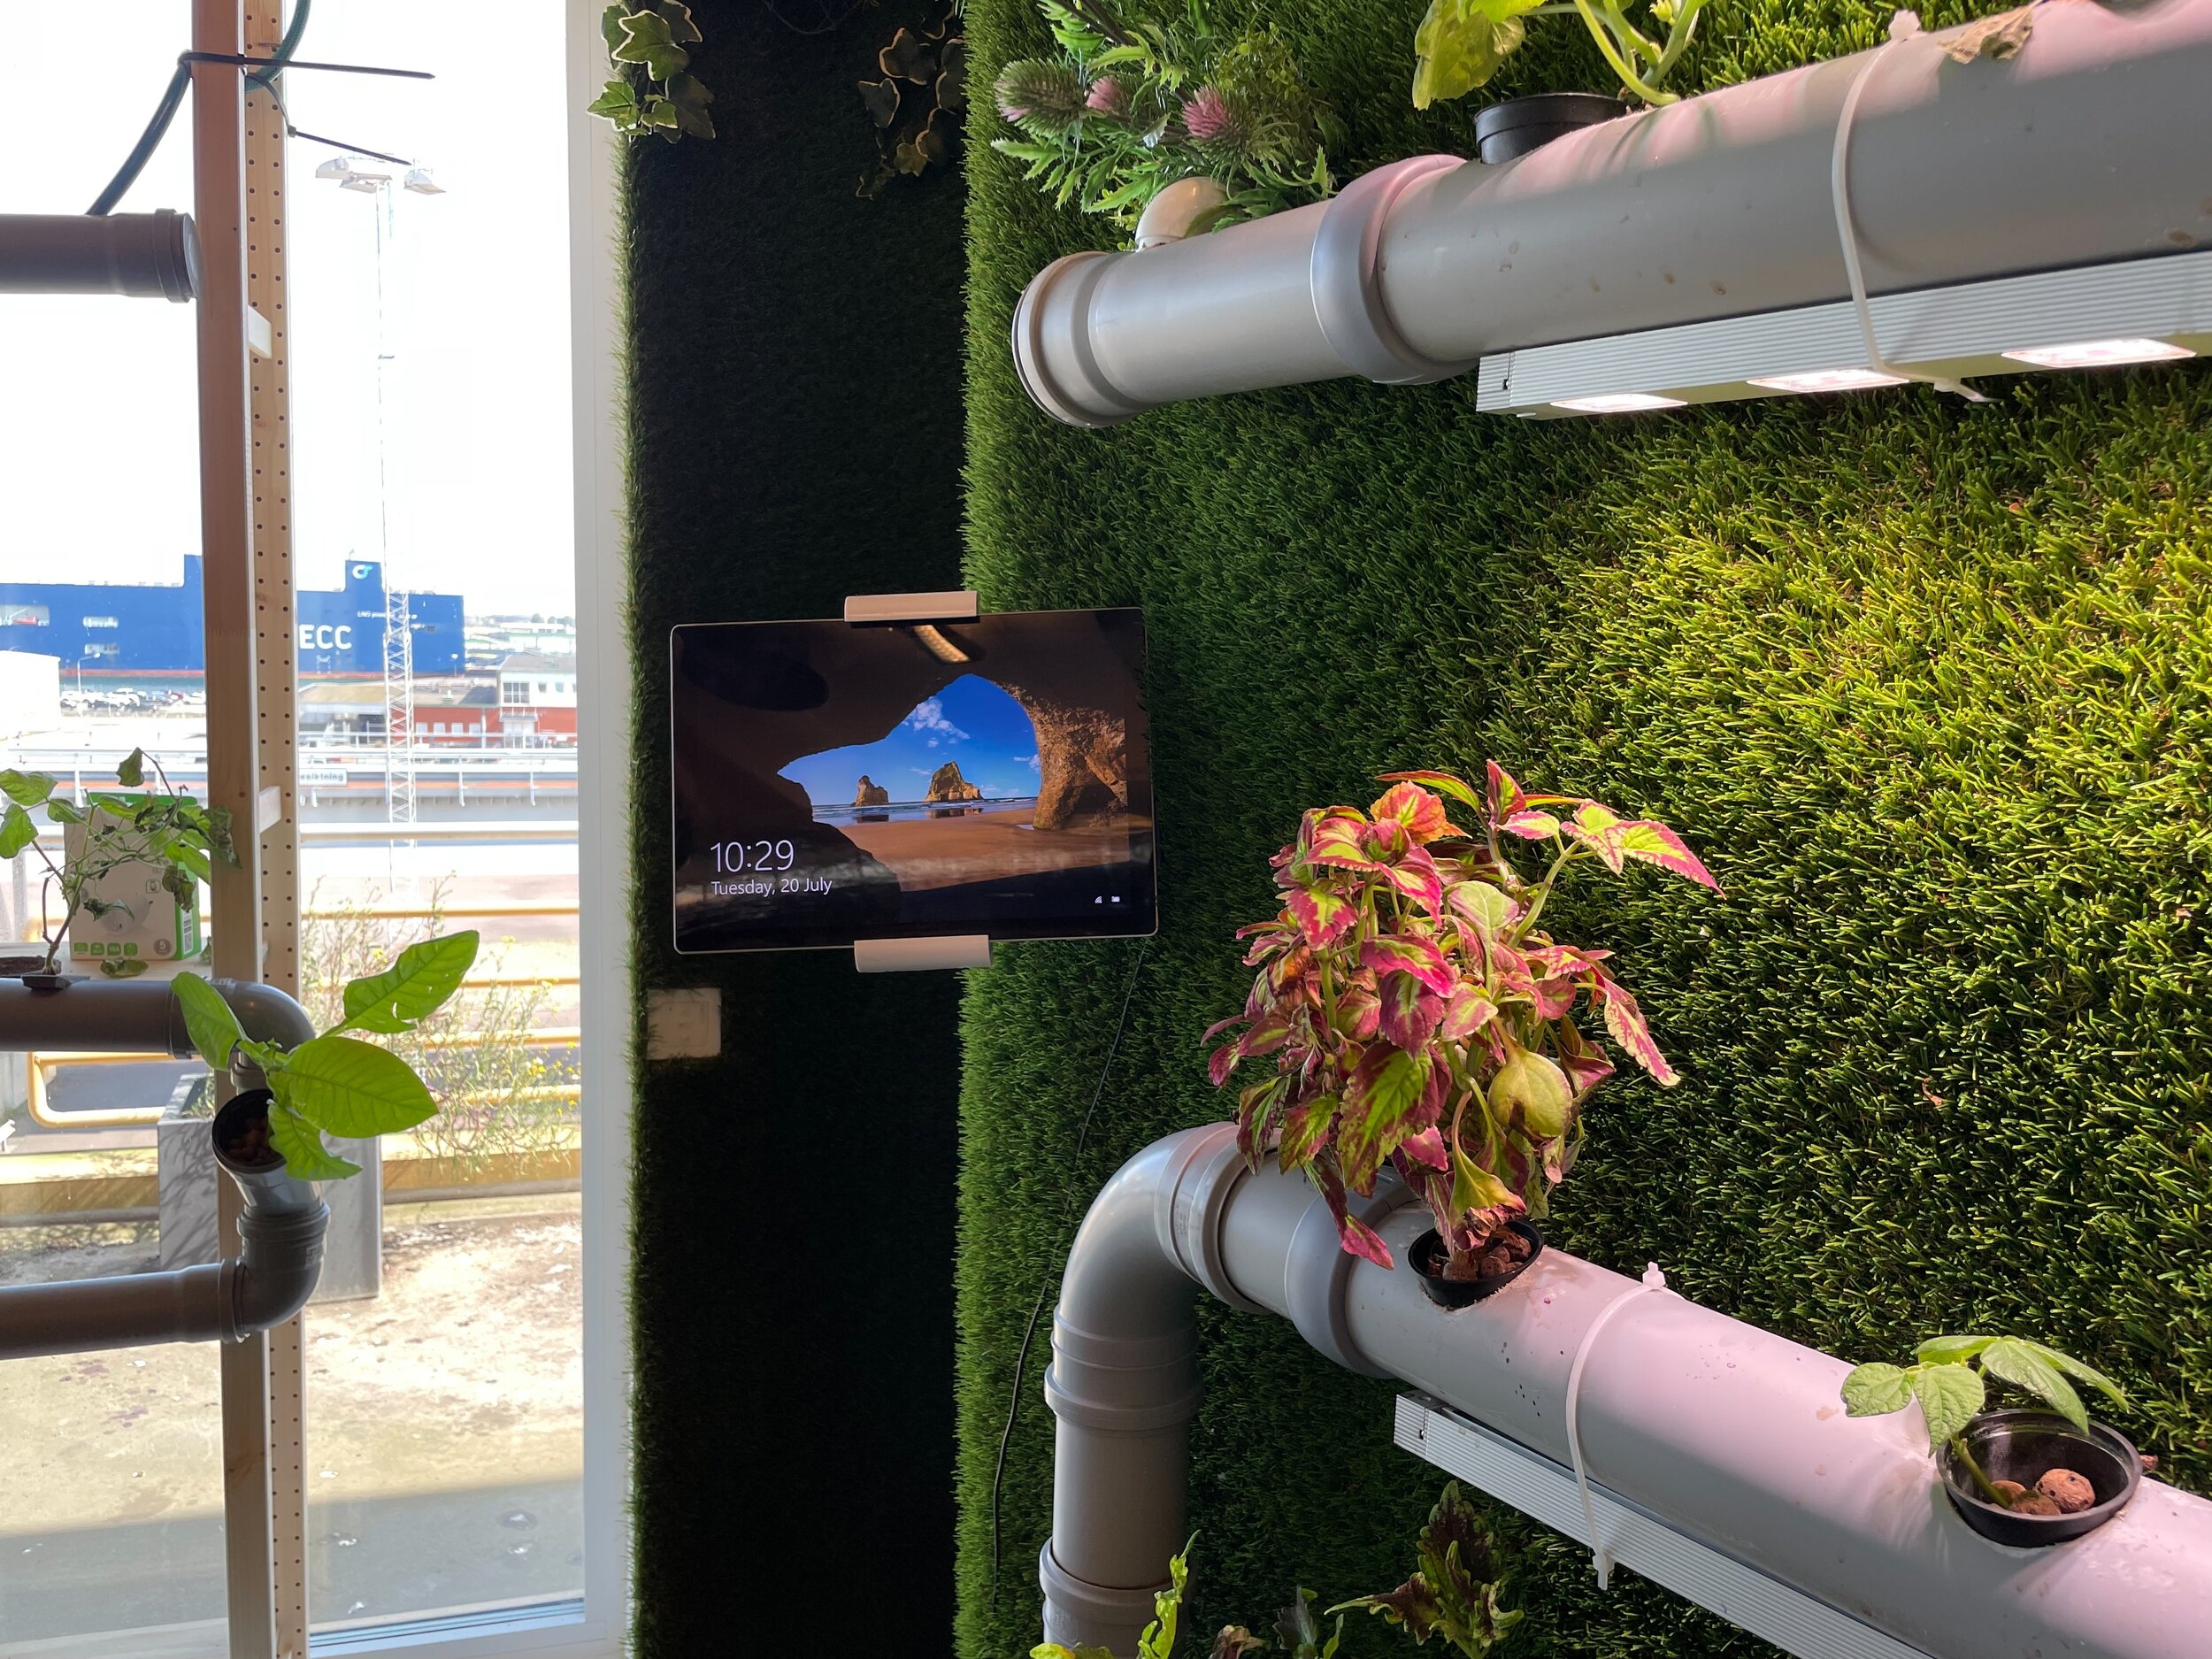 If you visit Jayway Malmö you can find an ipad connected to the Greenheart. There you can see how the IoT system is maneuvered and how it regulates the necessities in the pipelines for optimal growing.